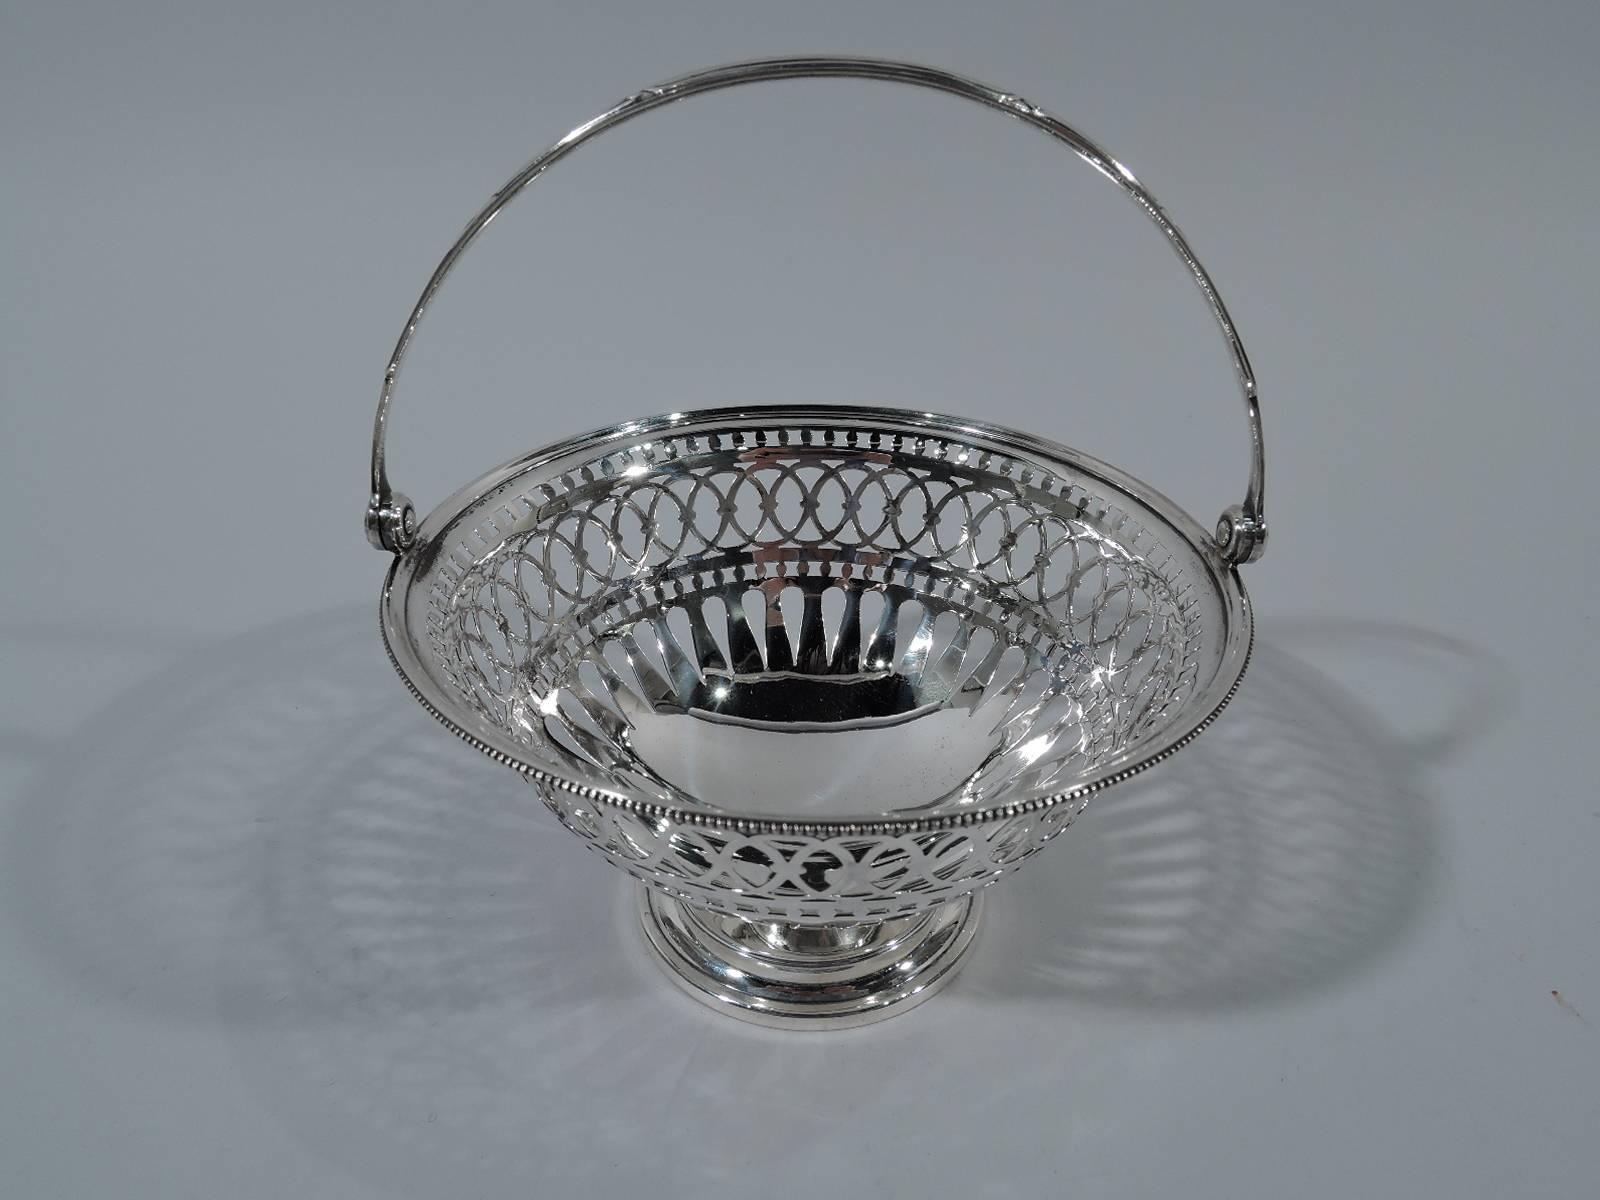 Pretty Edwardian sterling silver basket. Made by Gorham in Providence in 1897. Curved sides with geometric piercing and solid well. Beaded rim. Swing handle and stepped foot. Hallmark includes date symbol and no. 4925. 

H (with handle) 6 5/8 x D